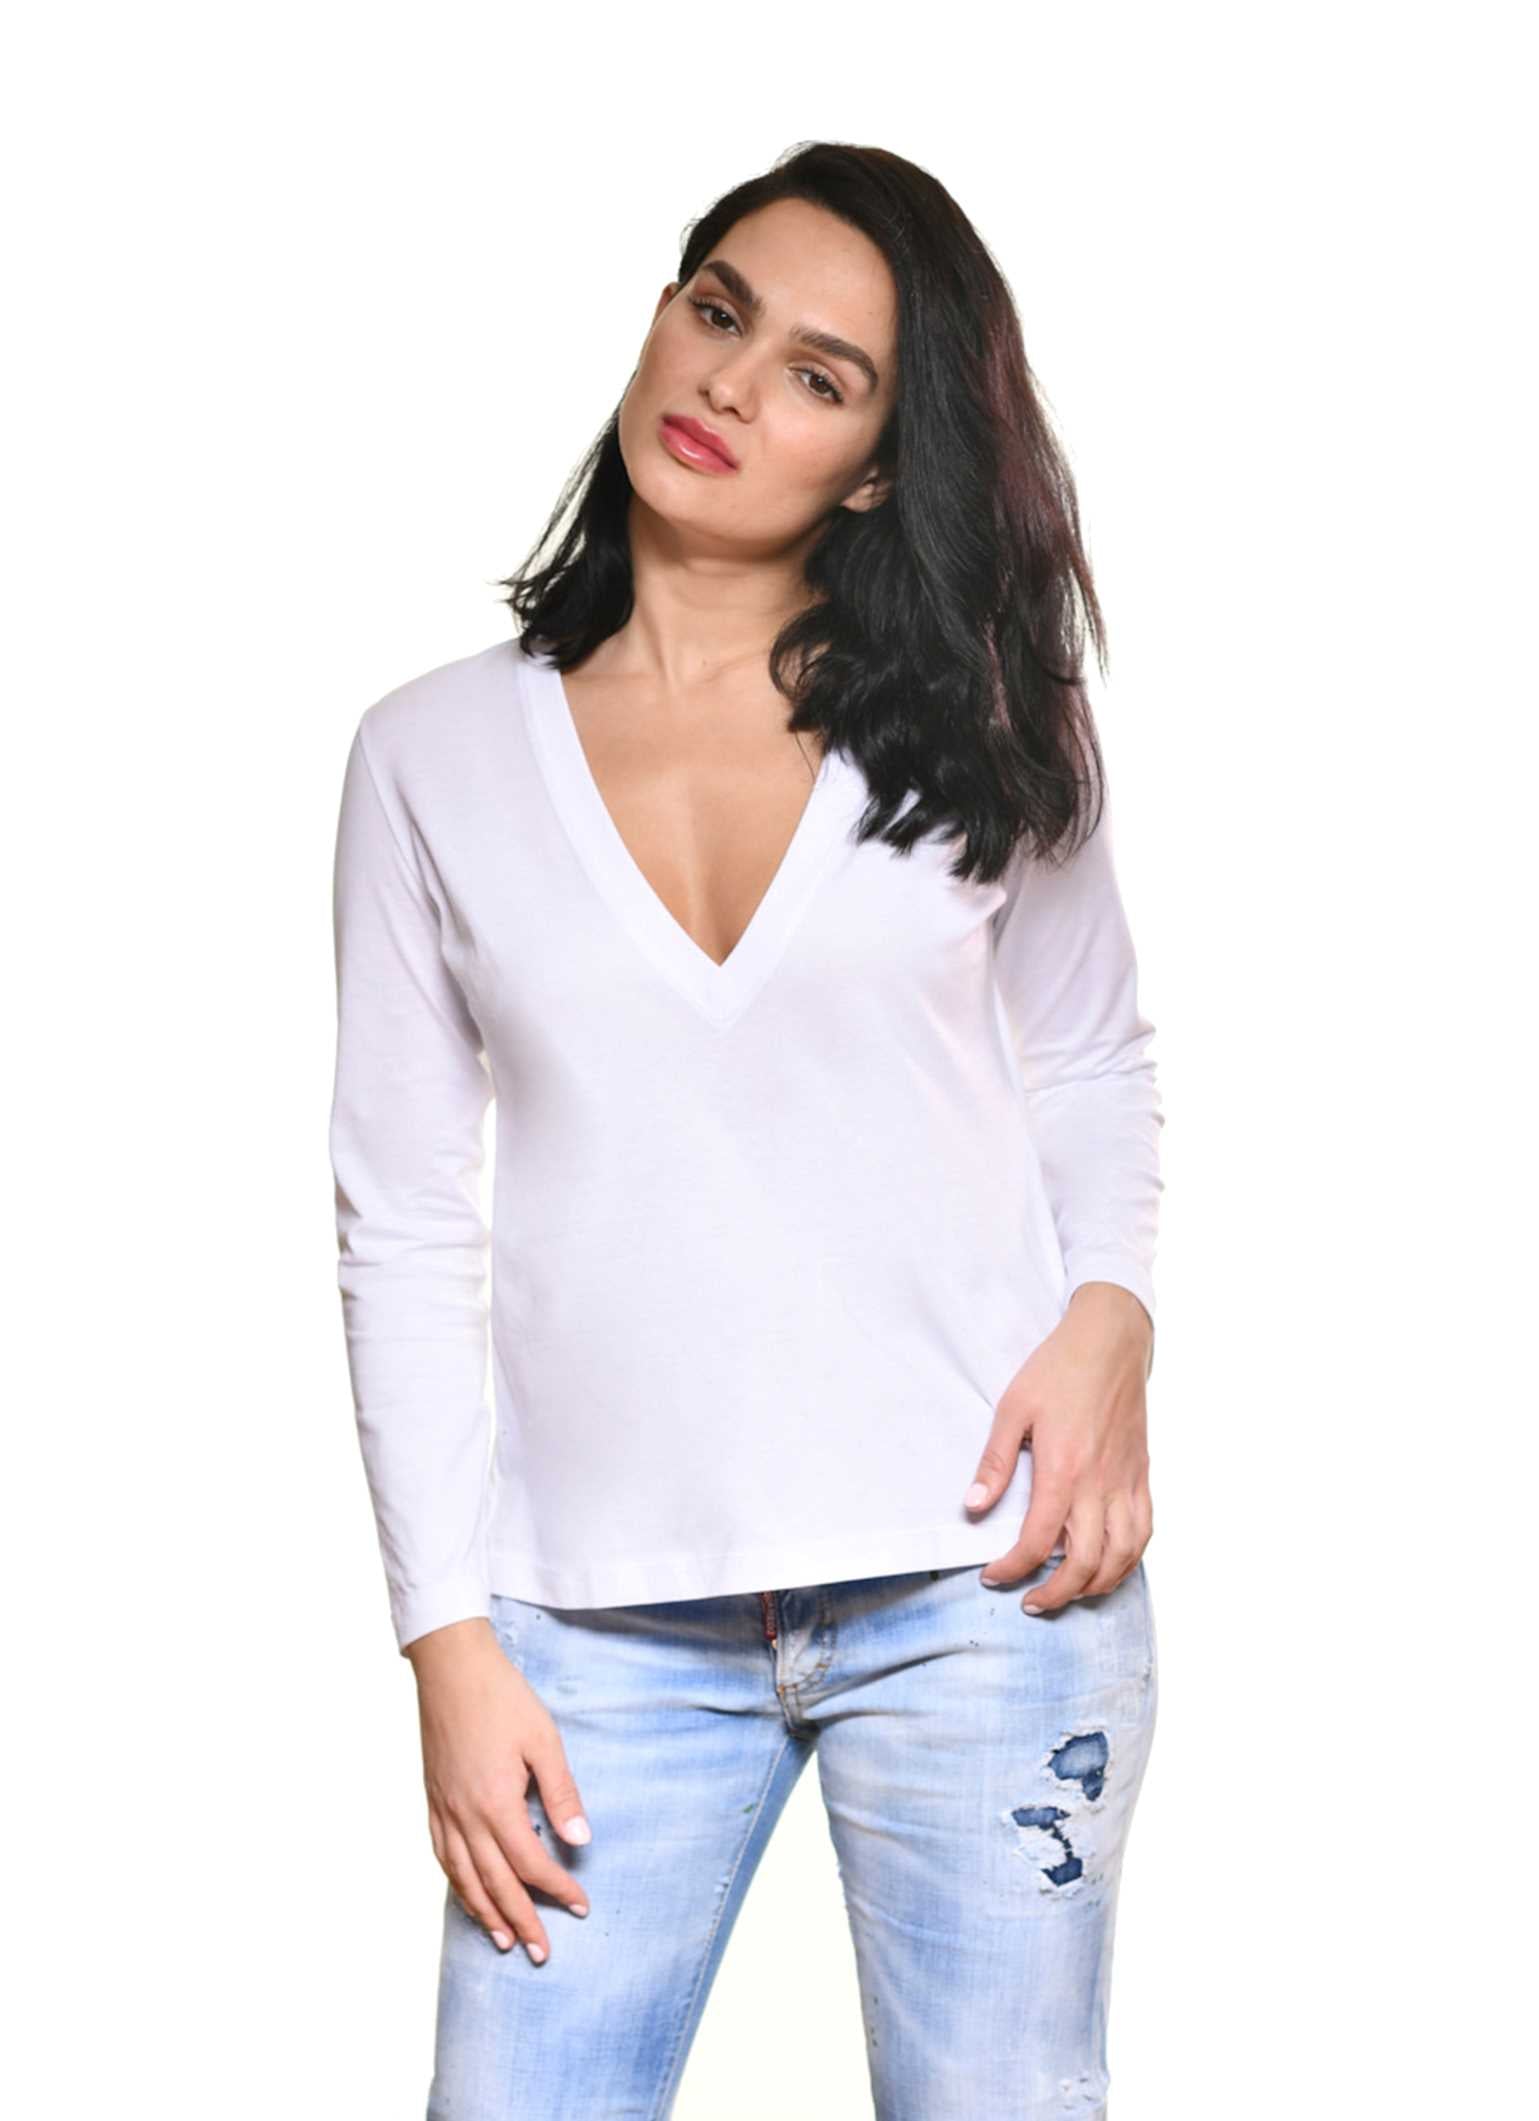 Women wearing long sleeve tee with v neck from Carmen Sol in color white with jeans